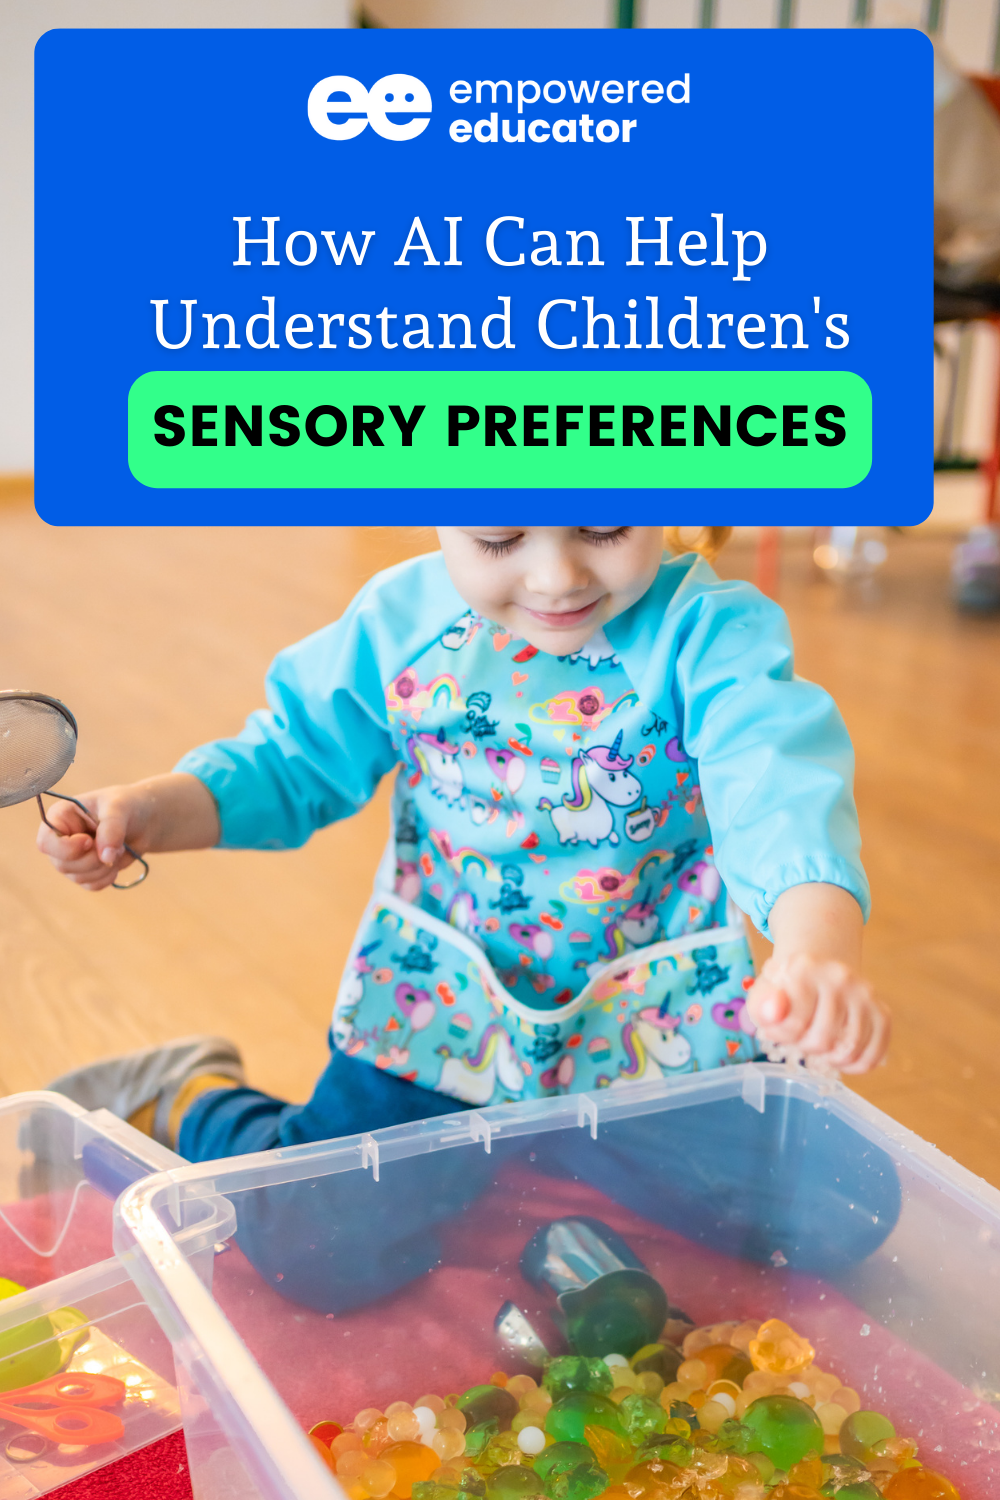 How AI could help early childhood educators understand sensory differences for children